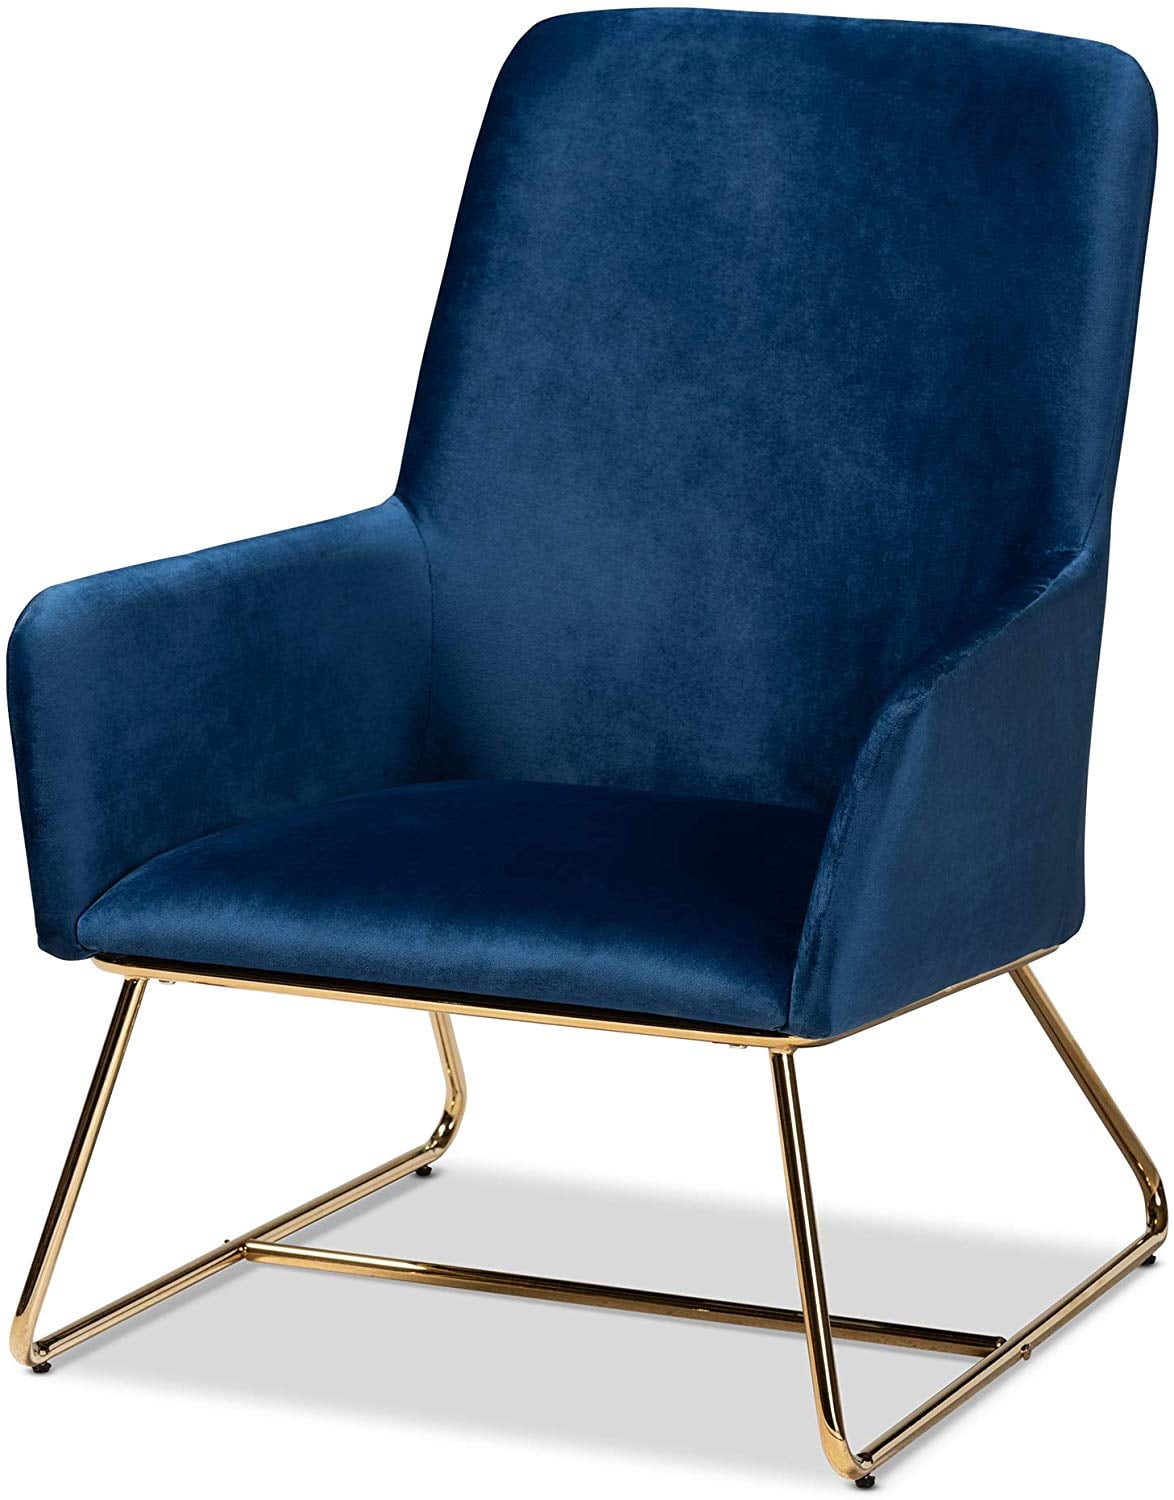 Baxton Studio Chair Forget Stressful Store Shopping Amazon Has The Best Accent Chairs Money Can Buy Popsugar Home Photo 9